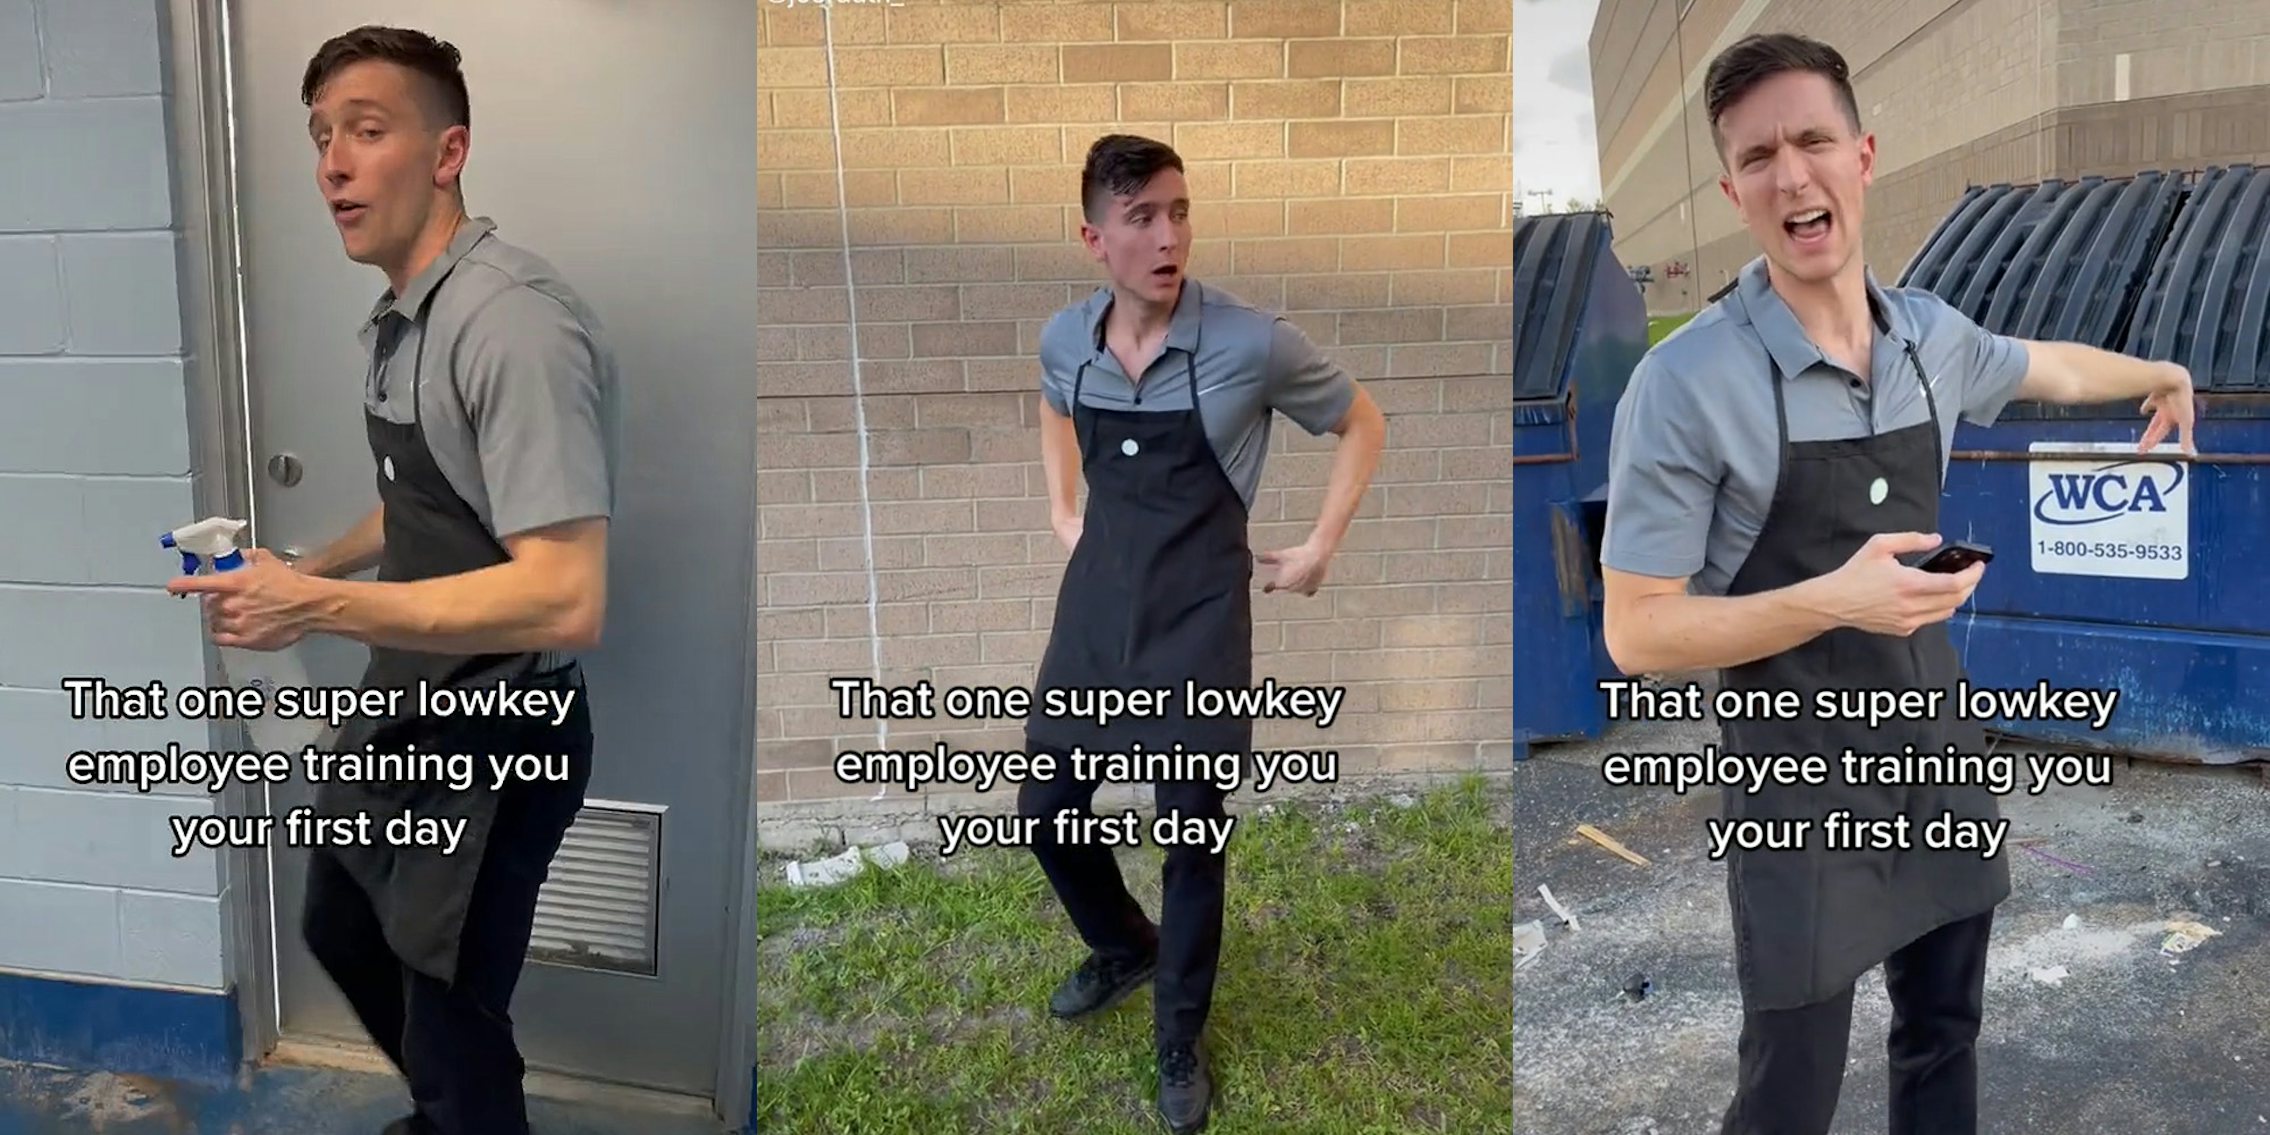 worker opening door holding spray bottle caption 'That one super lowkey employee training you your first day' (l) worker outside hands at sides caption 'That one lowkey employee training you your first day' (c) worker hand towards dumpsters outside caption 'Taht one super lowkey employee training you on your first day' (r)